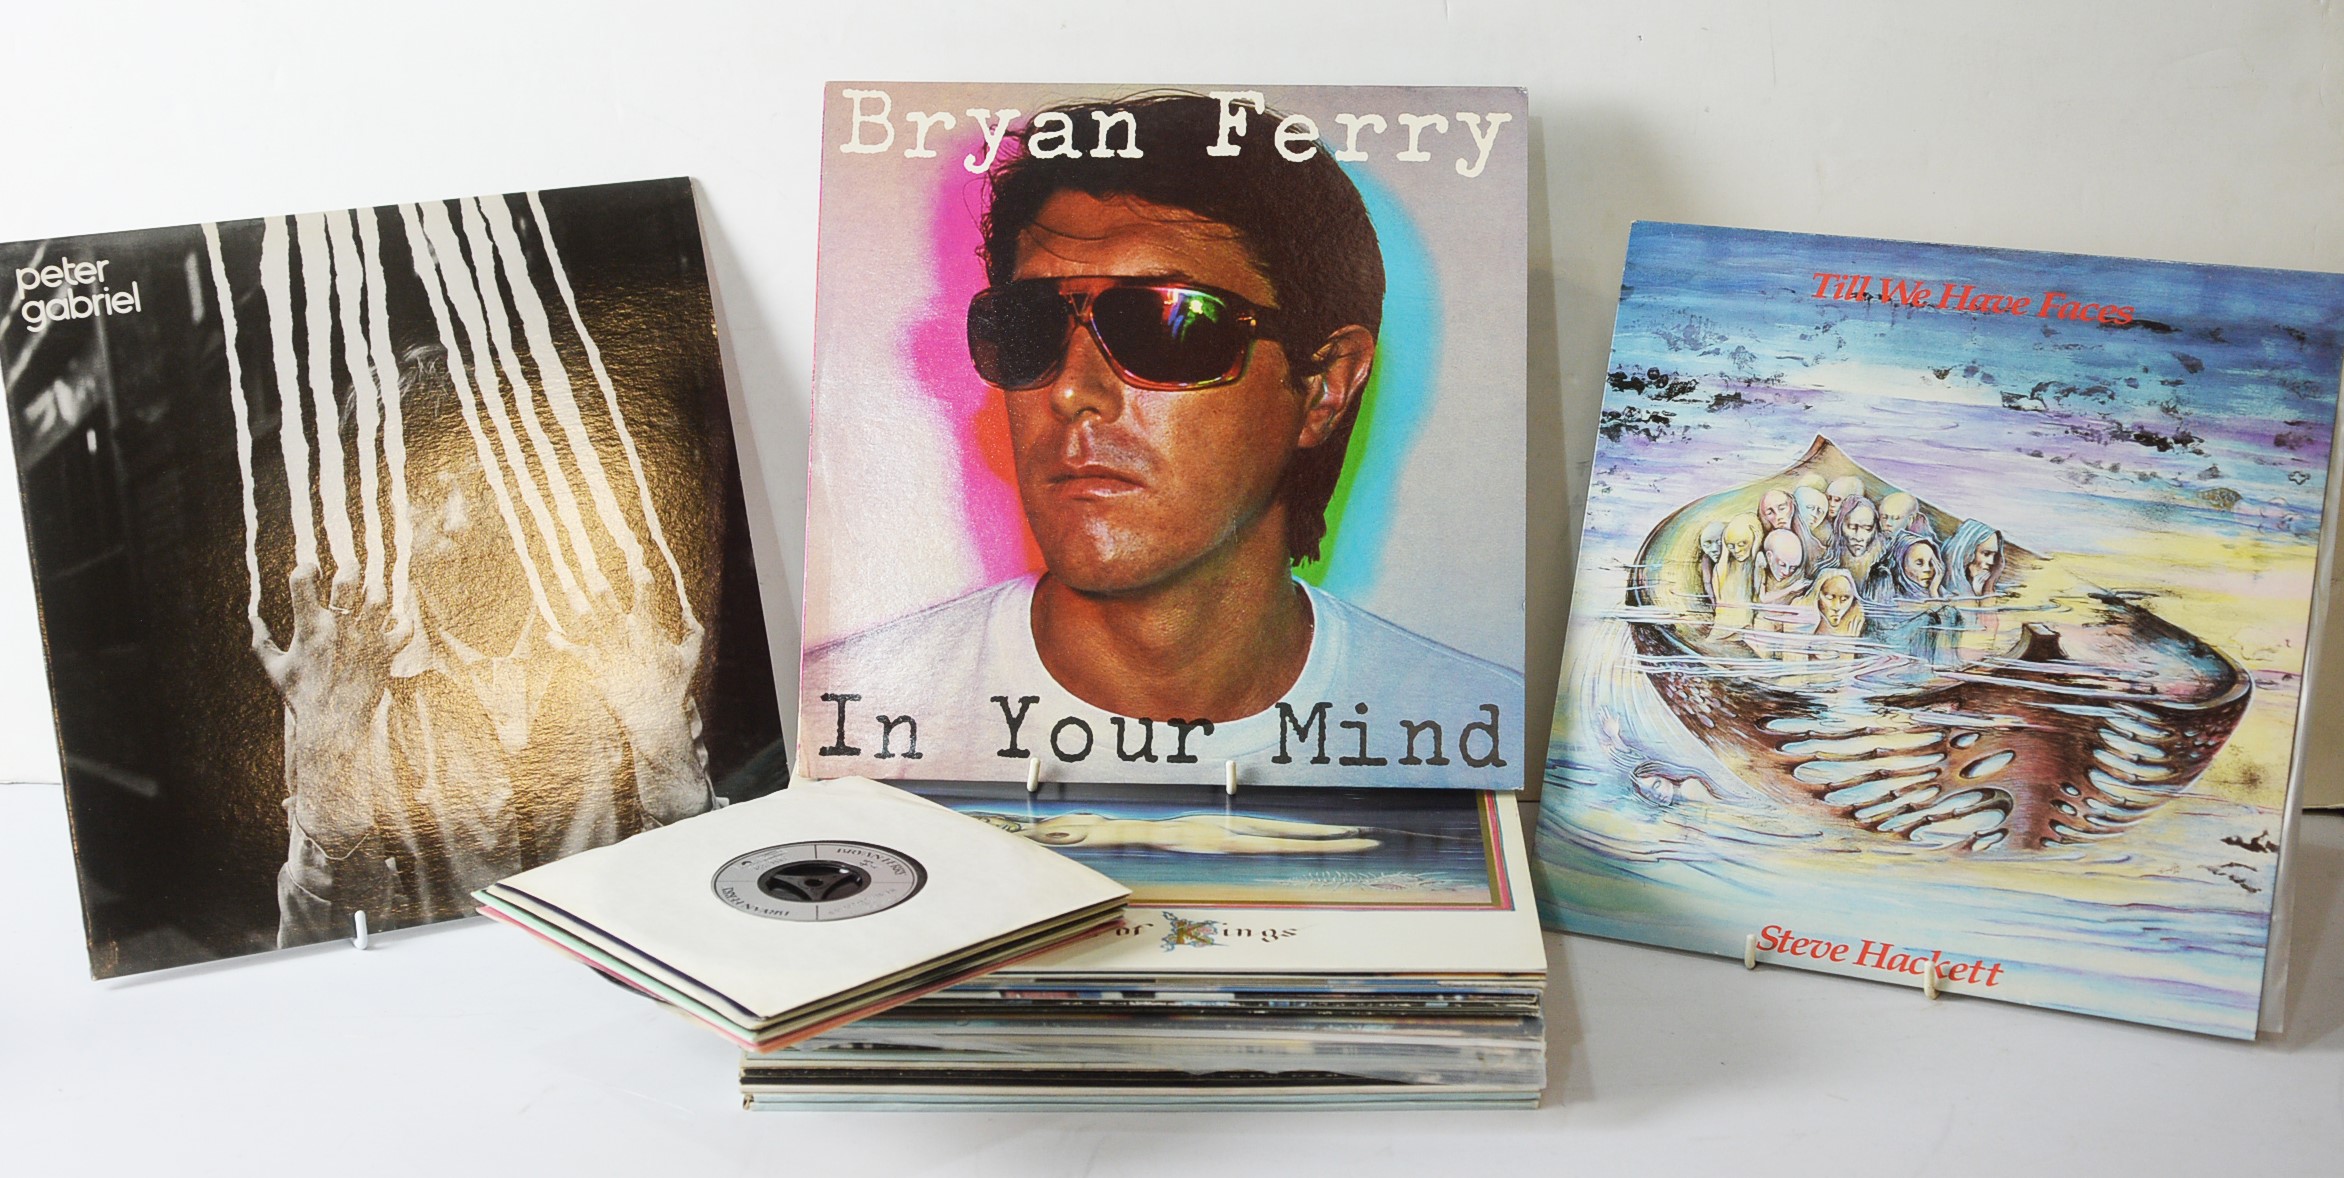 Bryan Ferry, Peter Gabriel and Steve Hackett LPs and singles